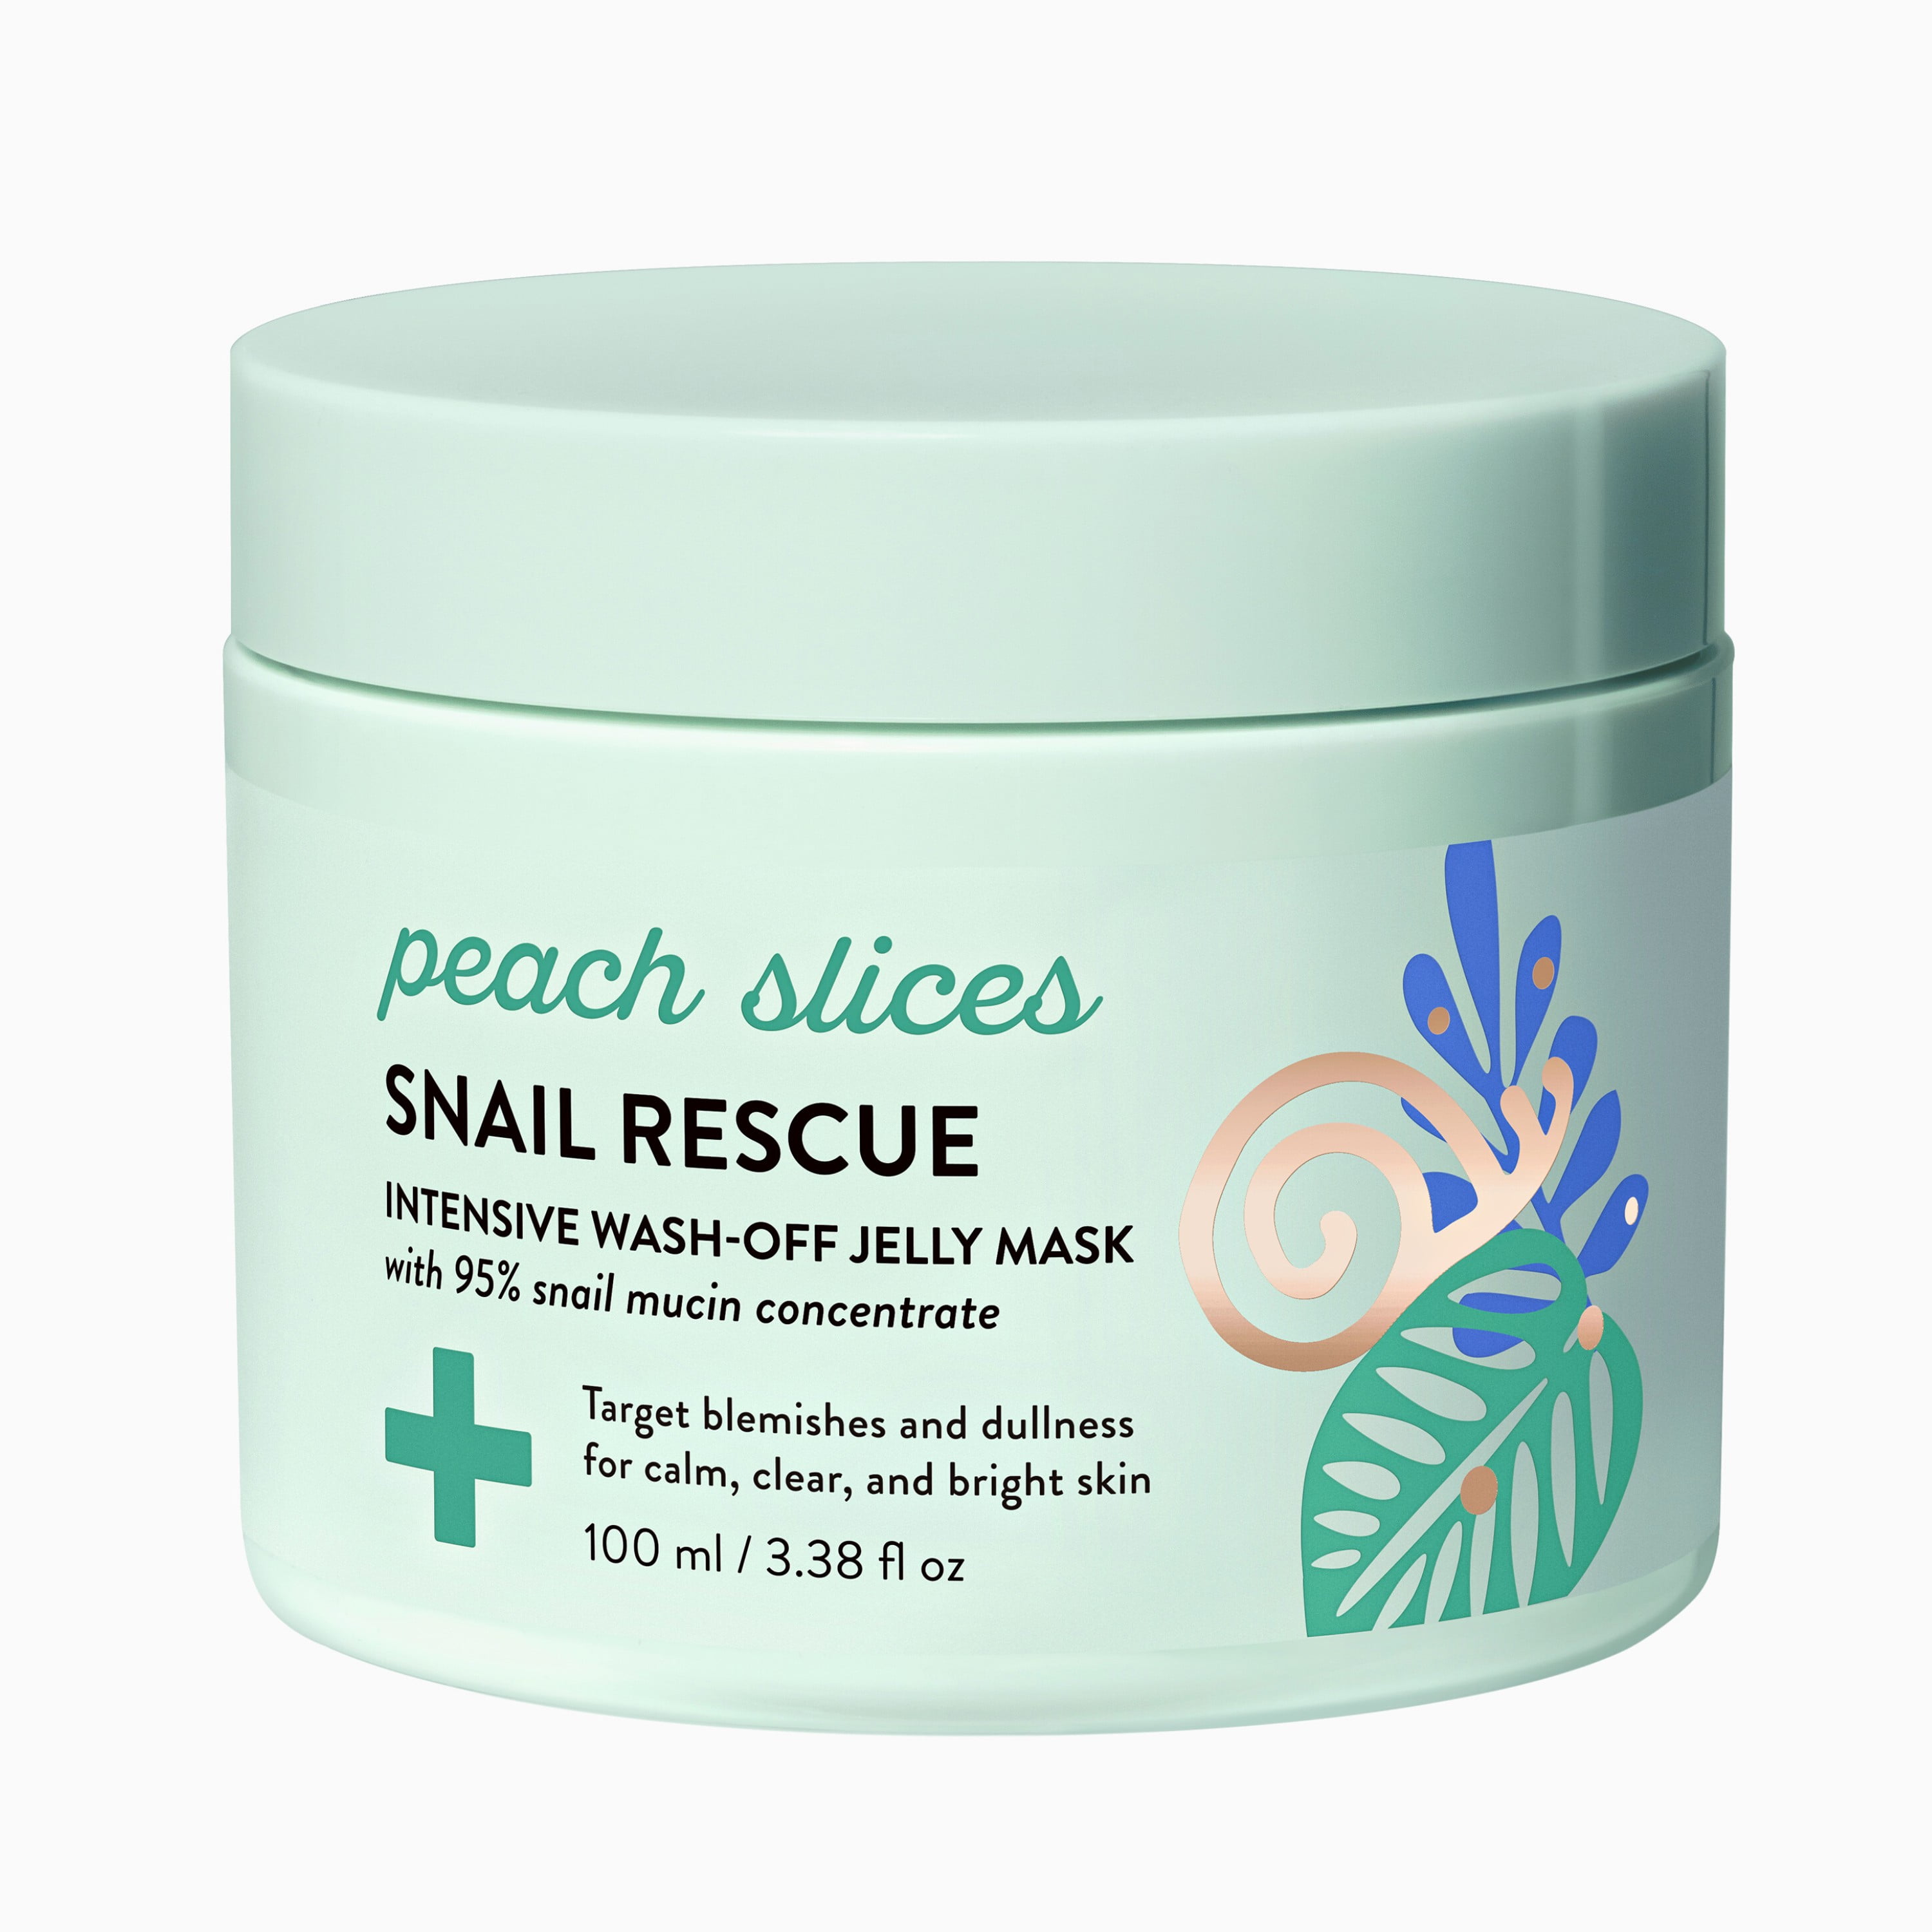 Peach Slices Snail Rescue Intensive Wash-off Jelly Face Mask with Snail Mucin, 2.82 fl oz